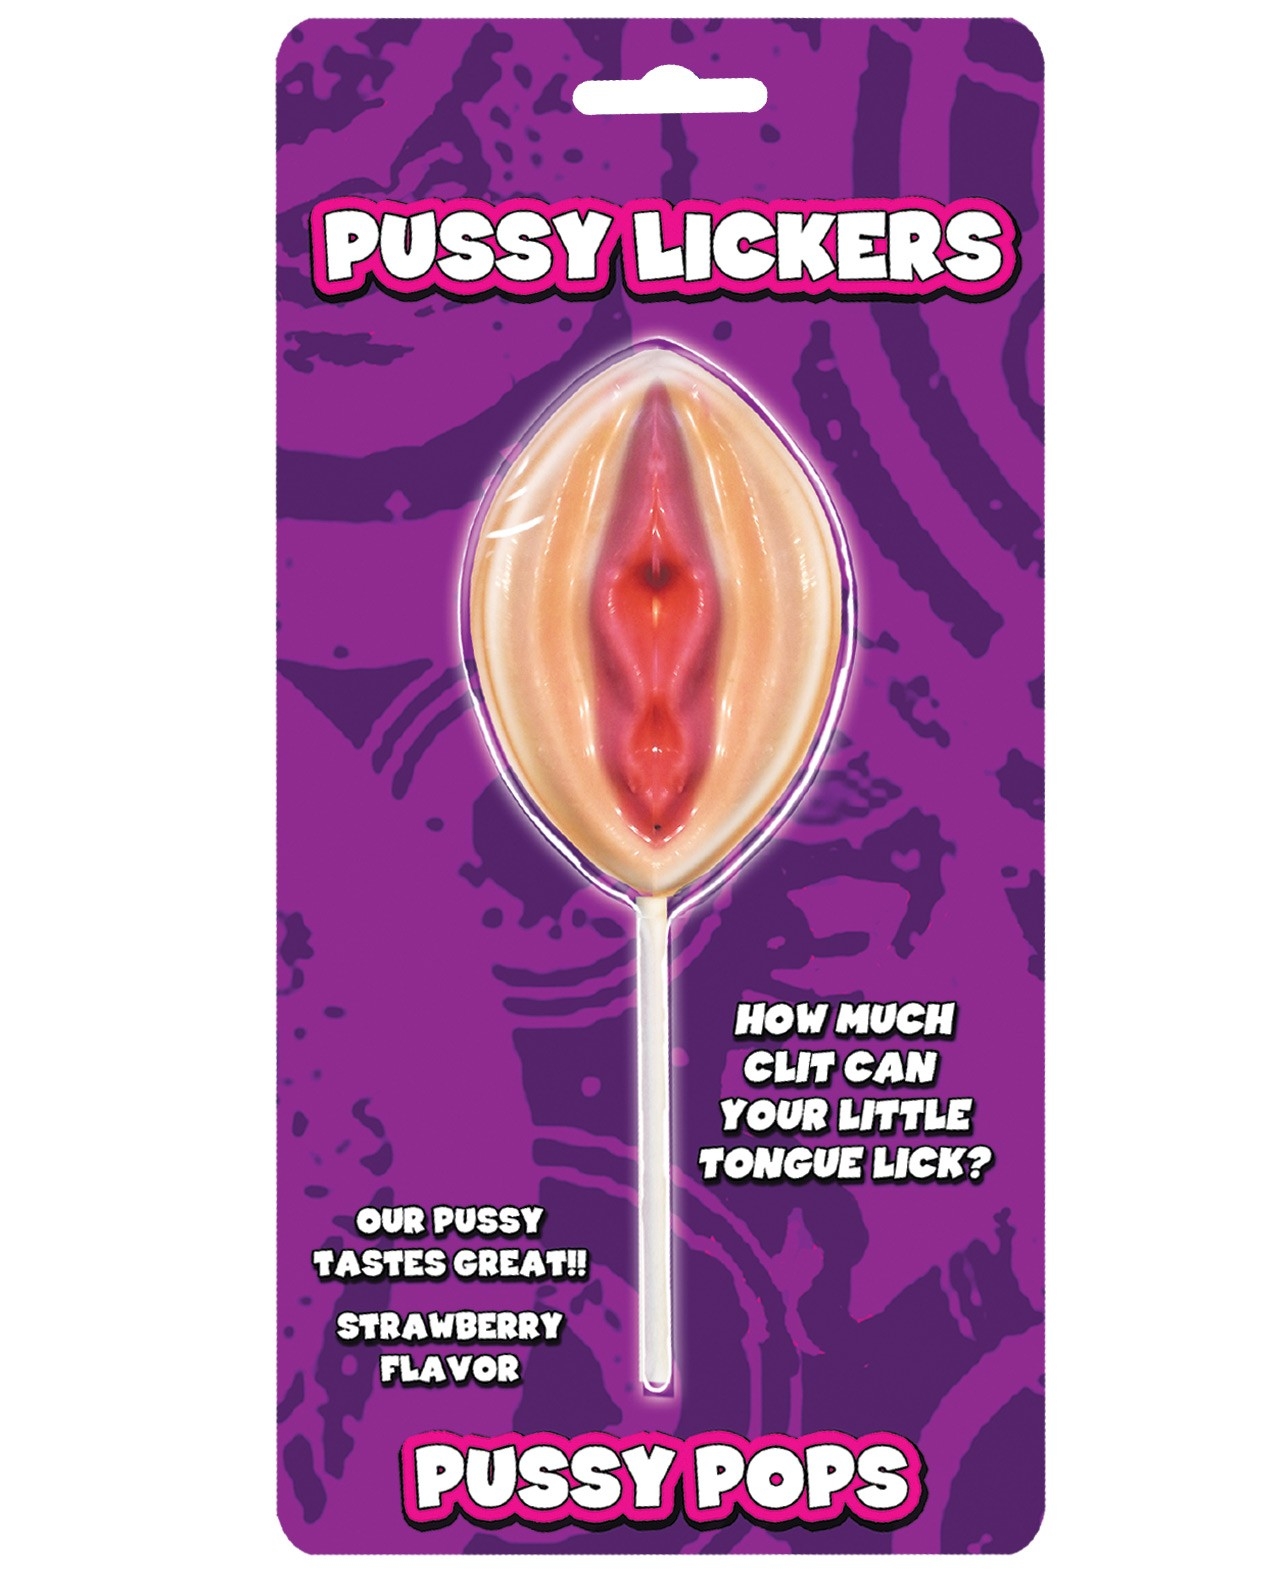 The Pussy Lickers 35